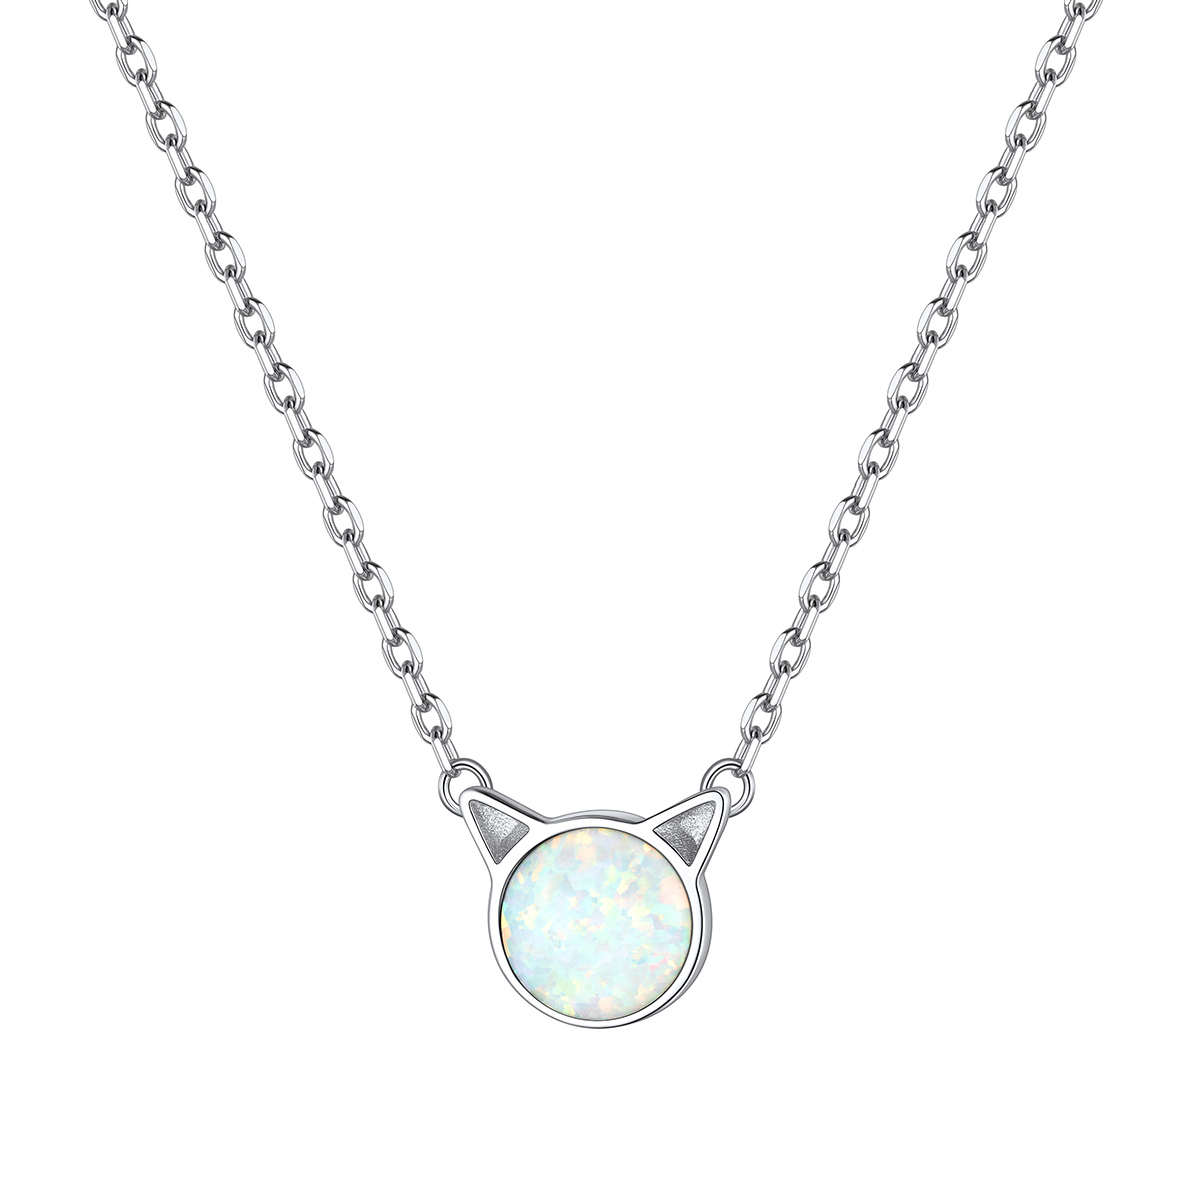 Sterling Silver Opal Necklace Cat Pendant Necklace For Women Cat Lover